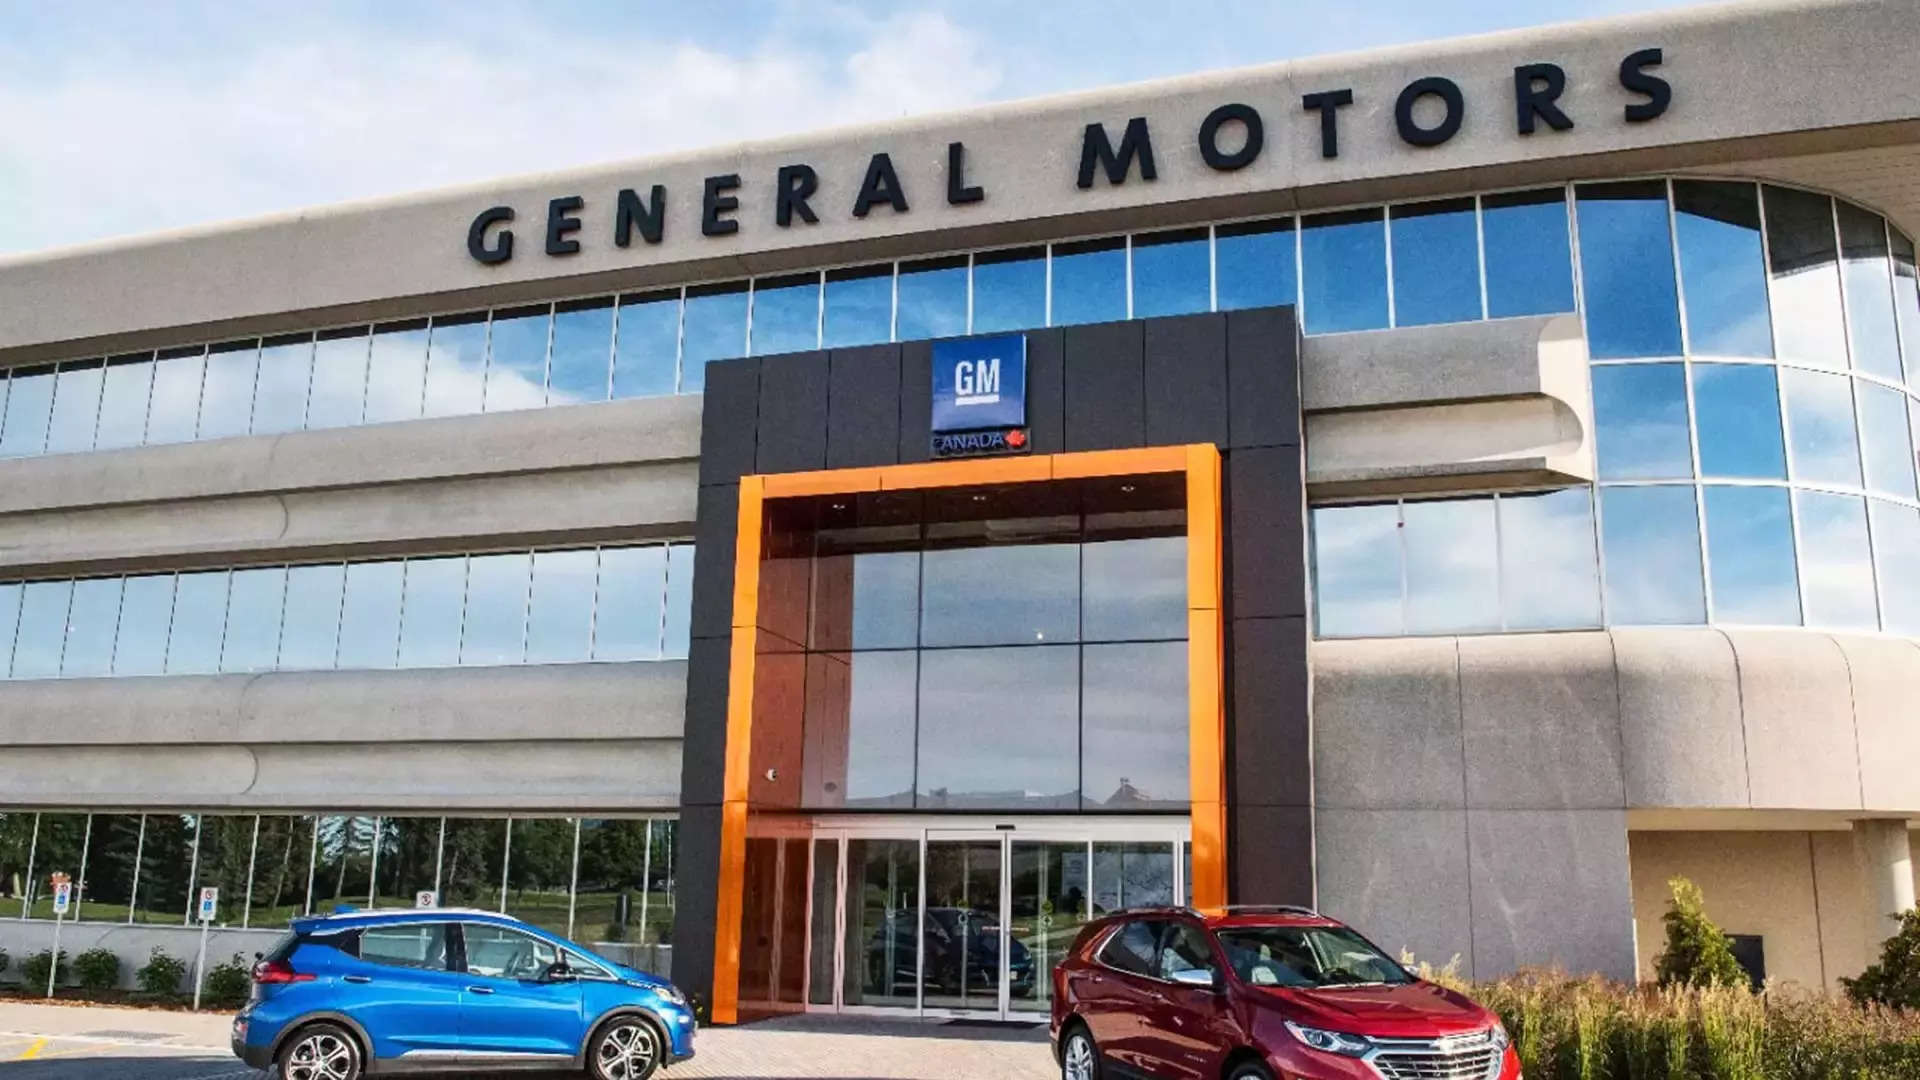  Starting later this year, GM plans to enable vehicles equipped with Super Cruise and the company's latest vehicle electronic system to operate hands-free on major, undivided highways in the United States and Canada, as well as additional miles of divided, interstate highways. 